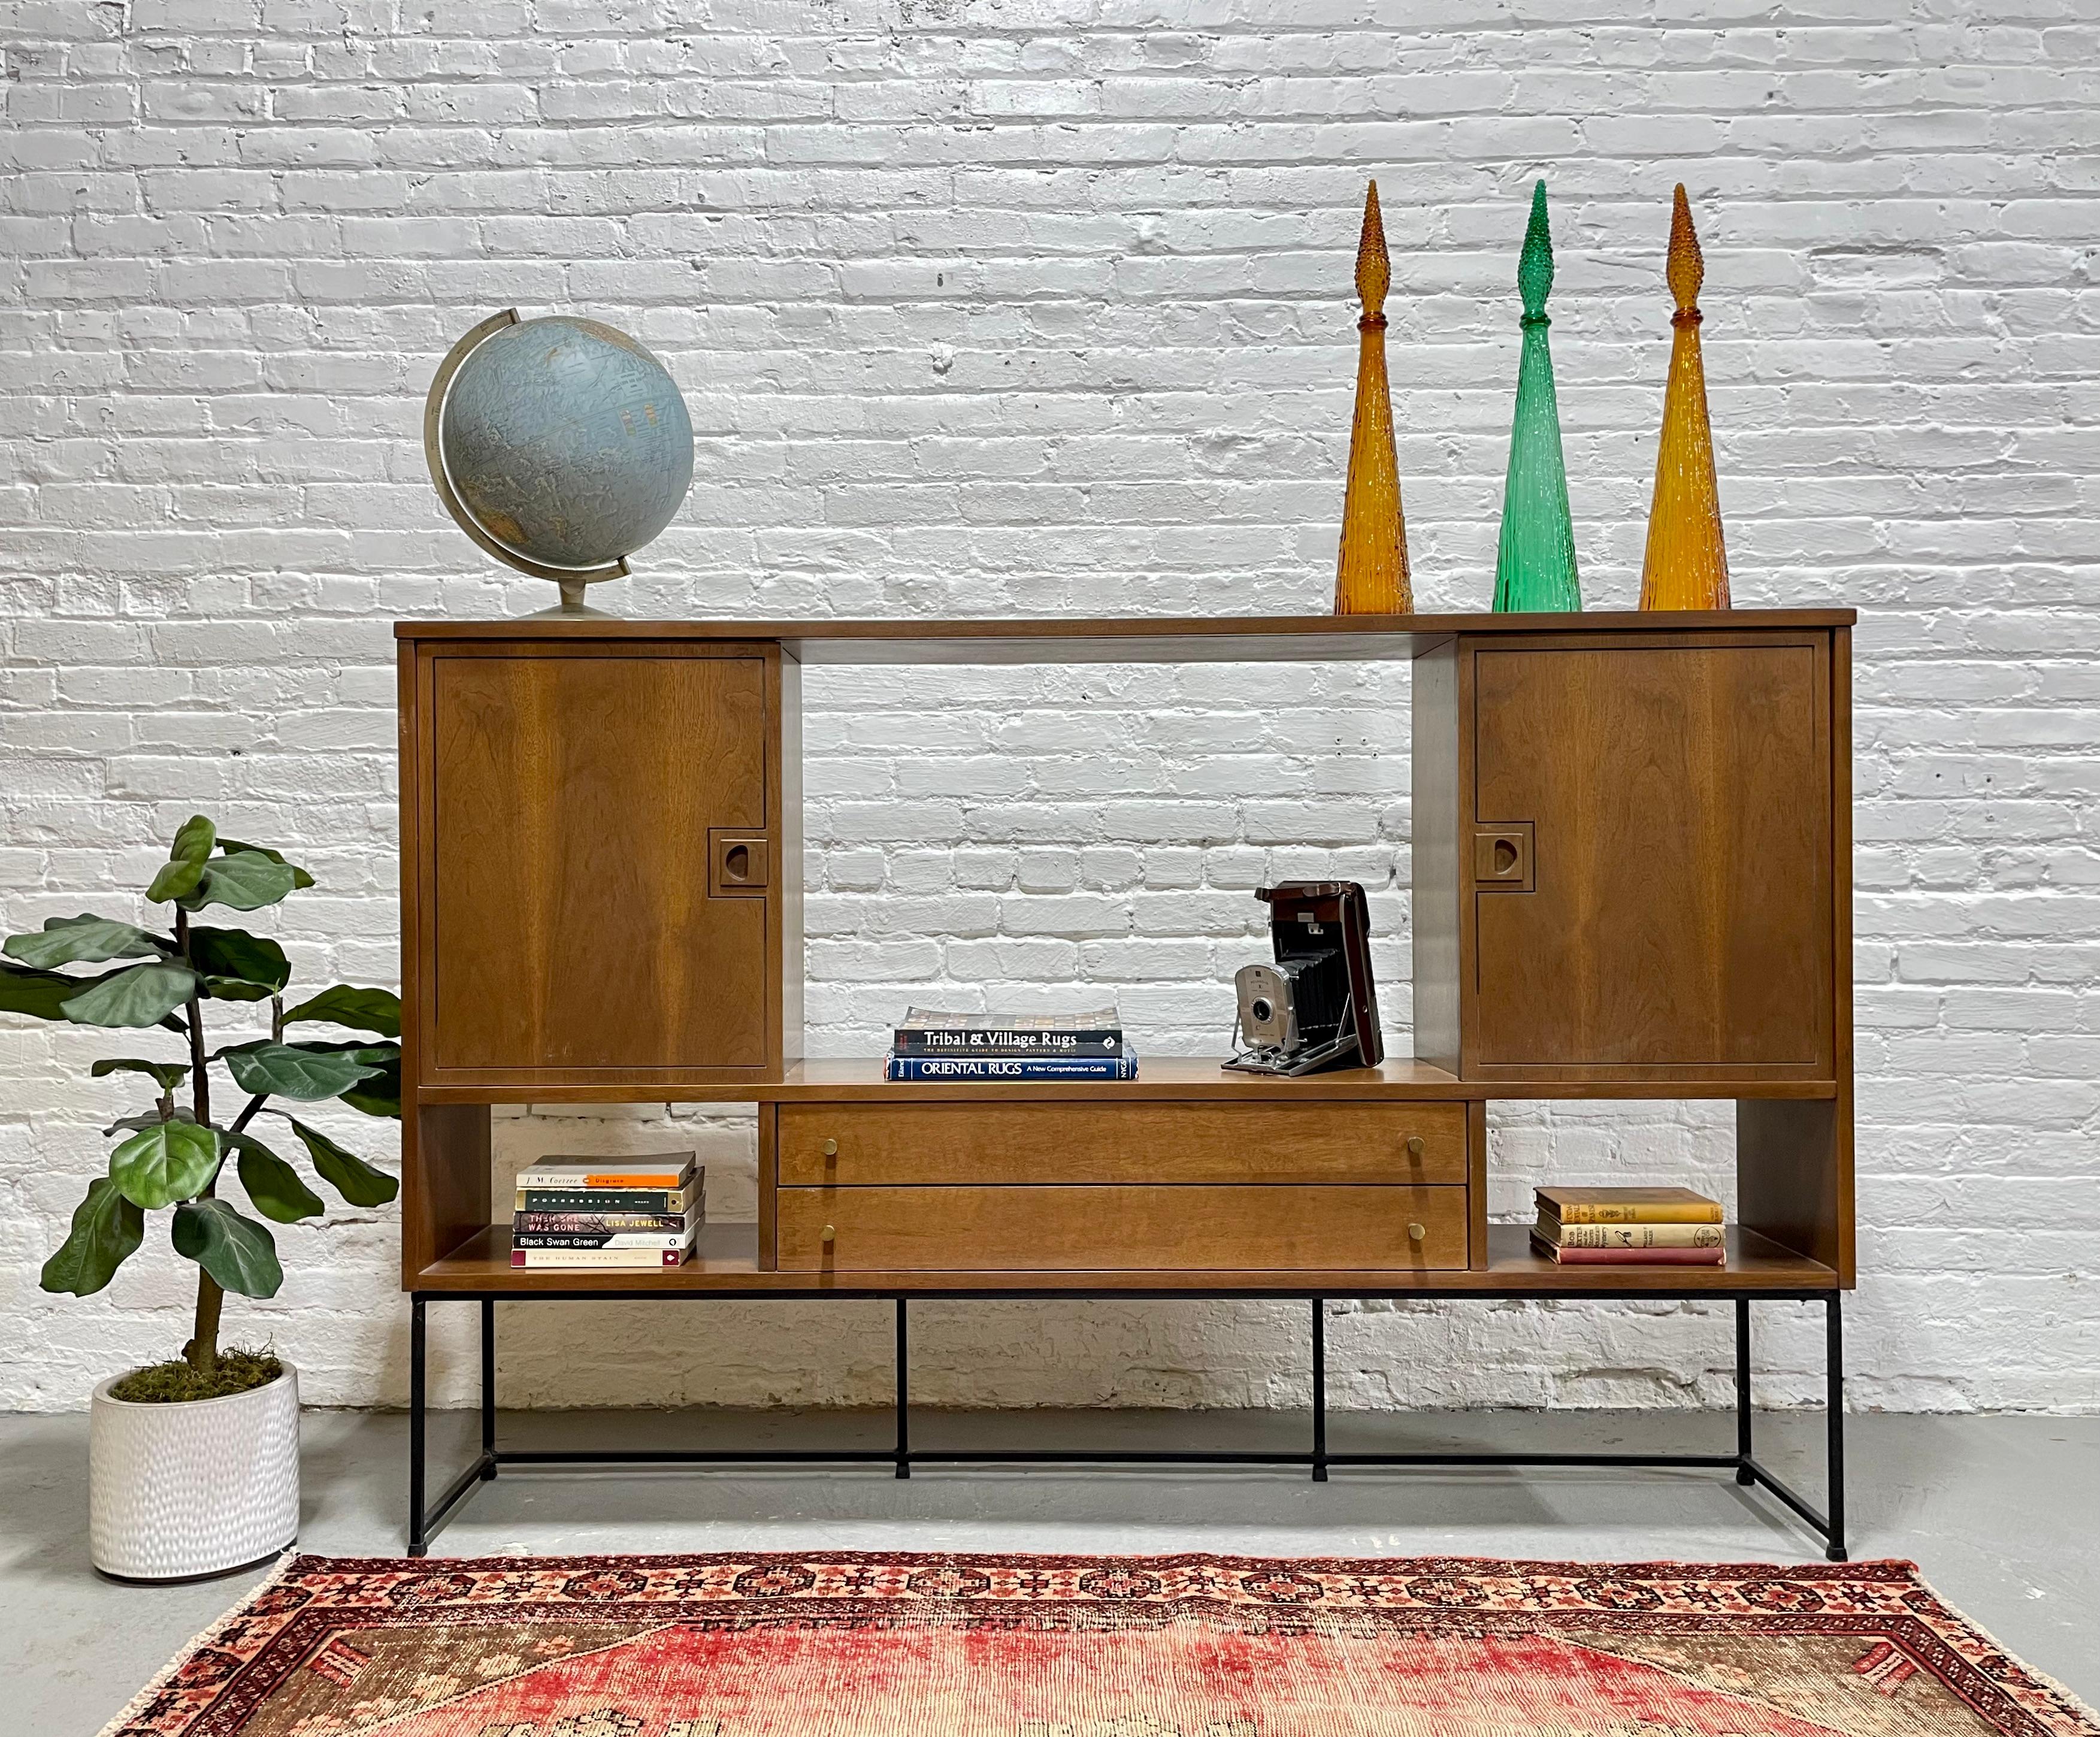 Mid Century Modern bar / bookcase by Stanley Furniture Company, circa 1960s.  This unique piece features sliding doors at the top with large cube-shaped compartments behind so you can hide or showcase your collection or liquors. A wide display shelf